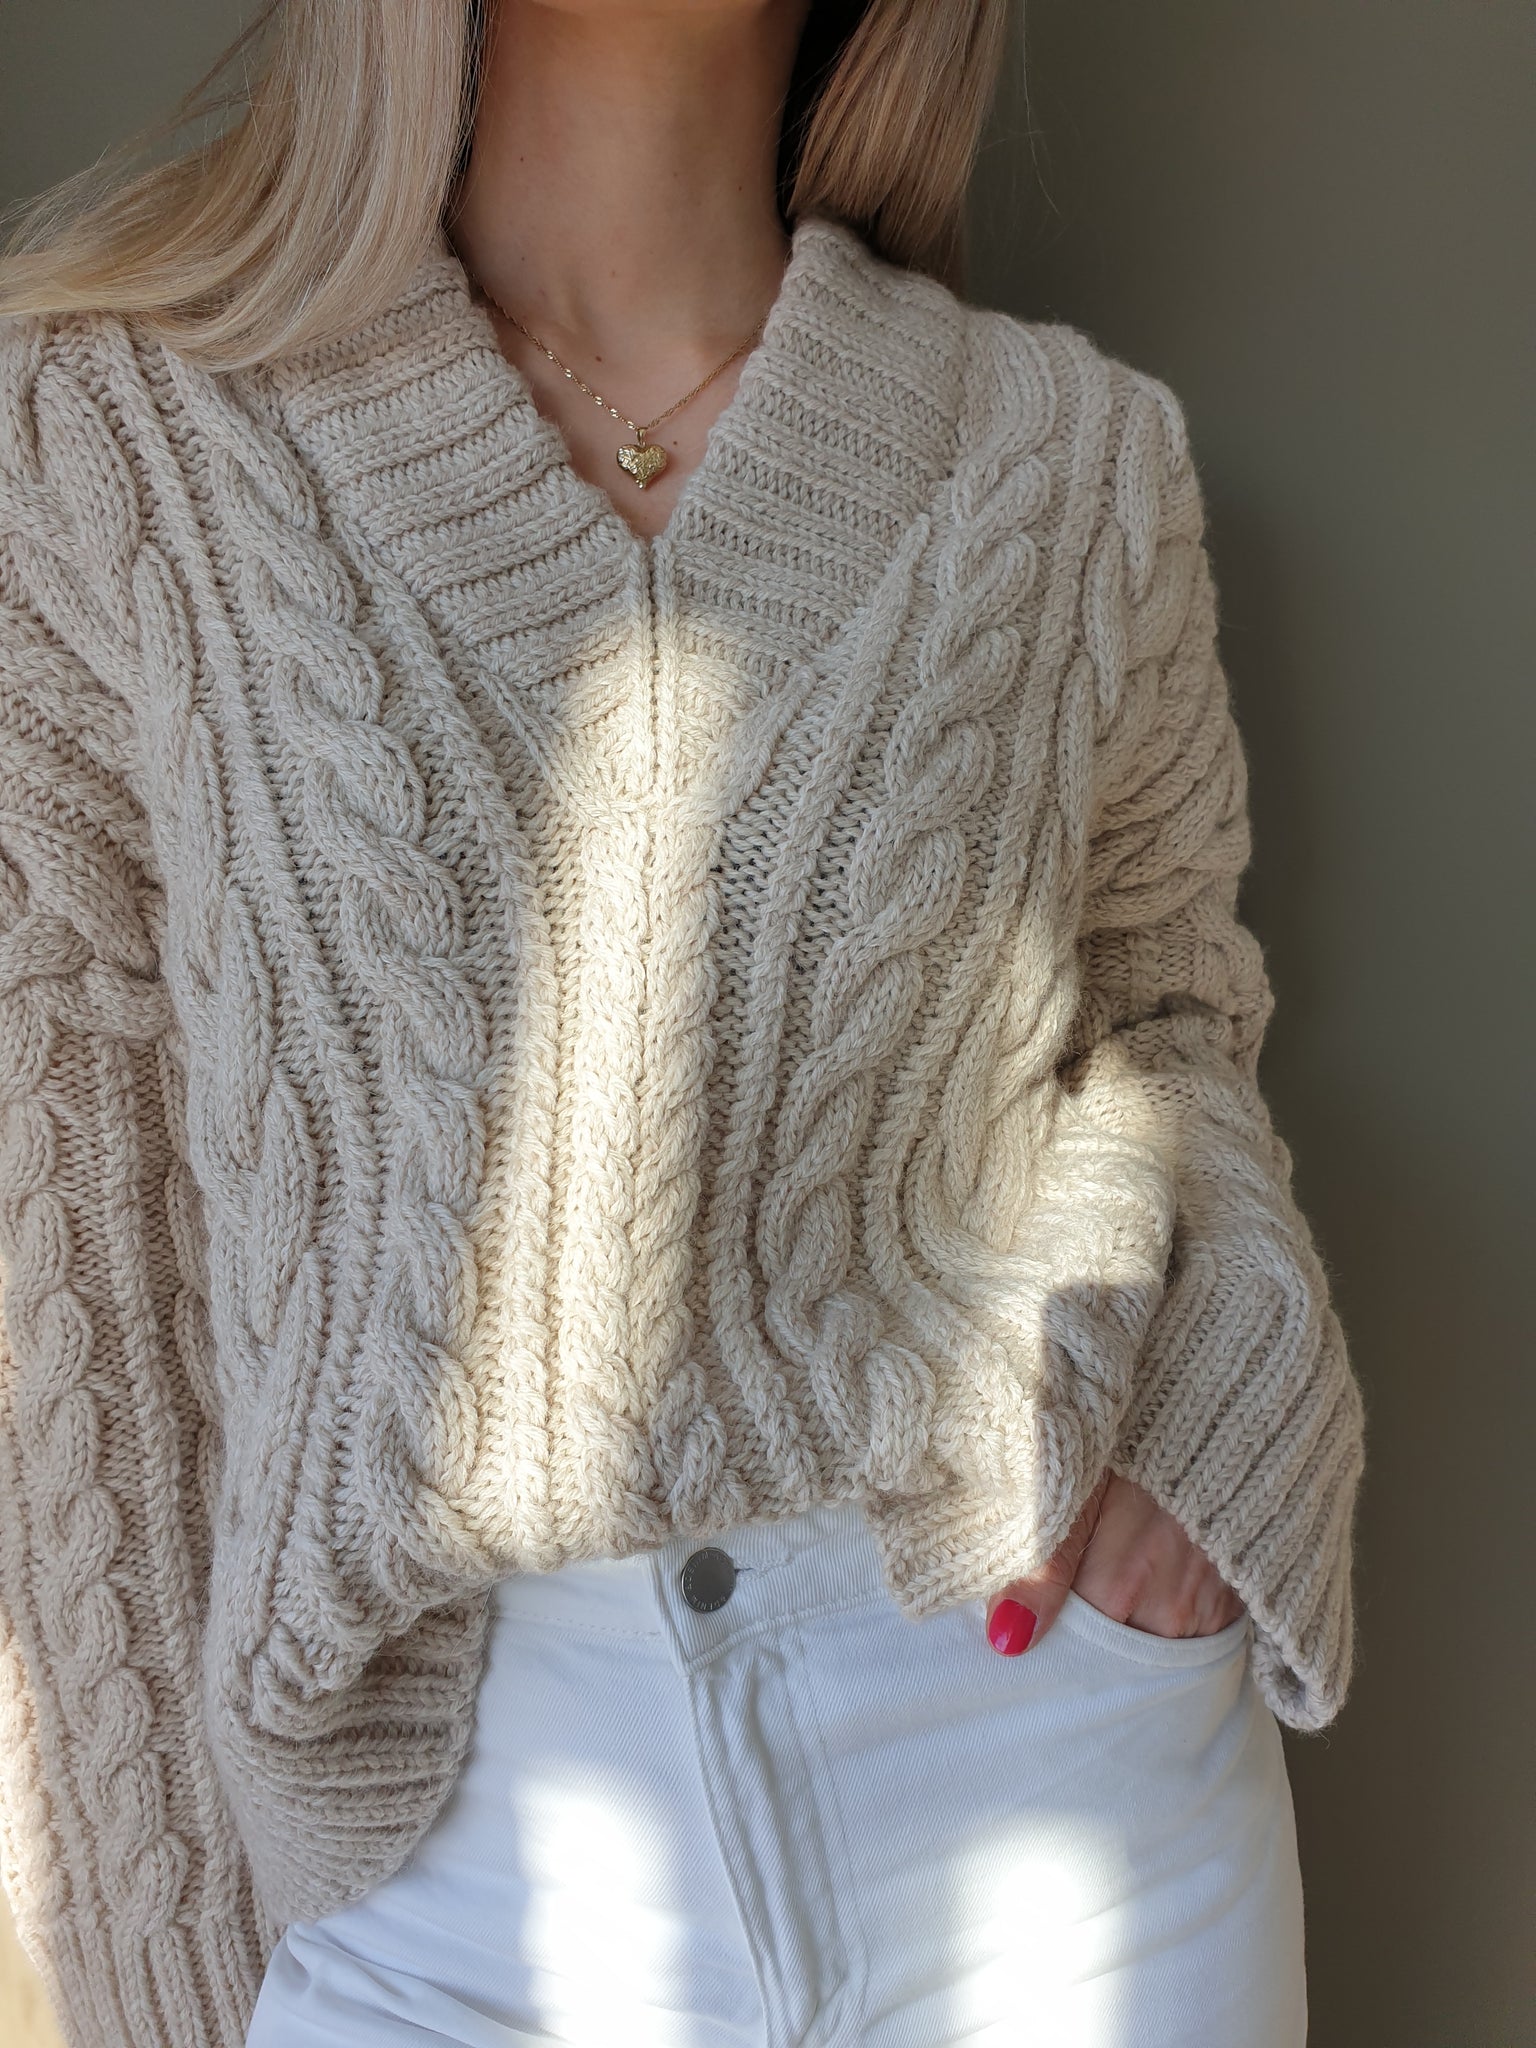 Sweater No. 20 - Knitting Pattern in English – • MY FAVOURITE THINGS ...